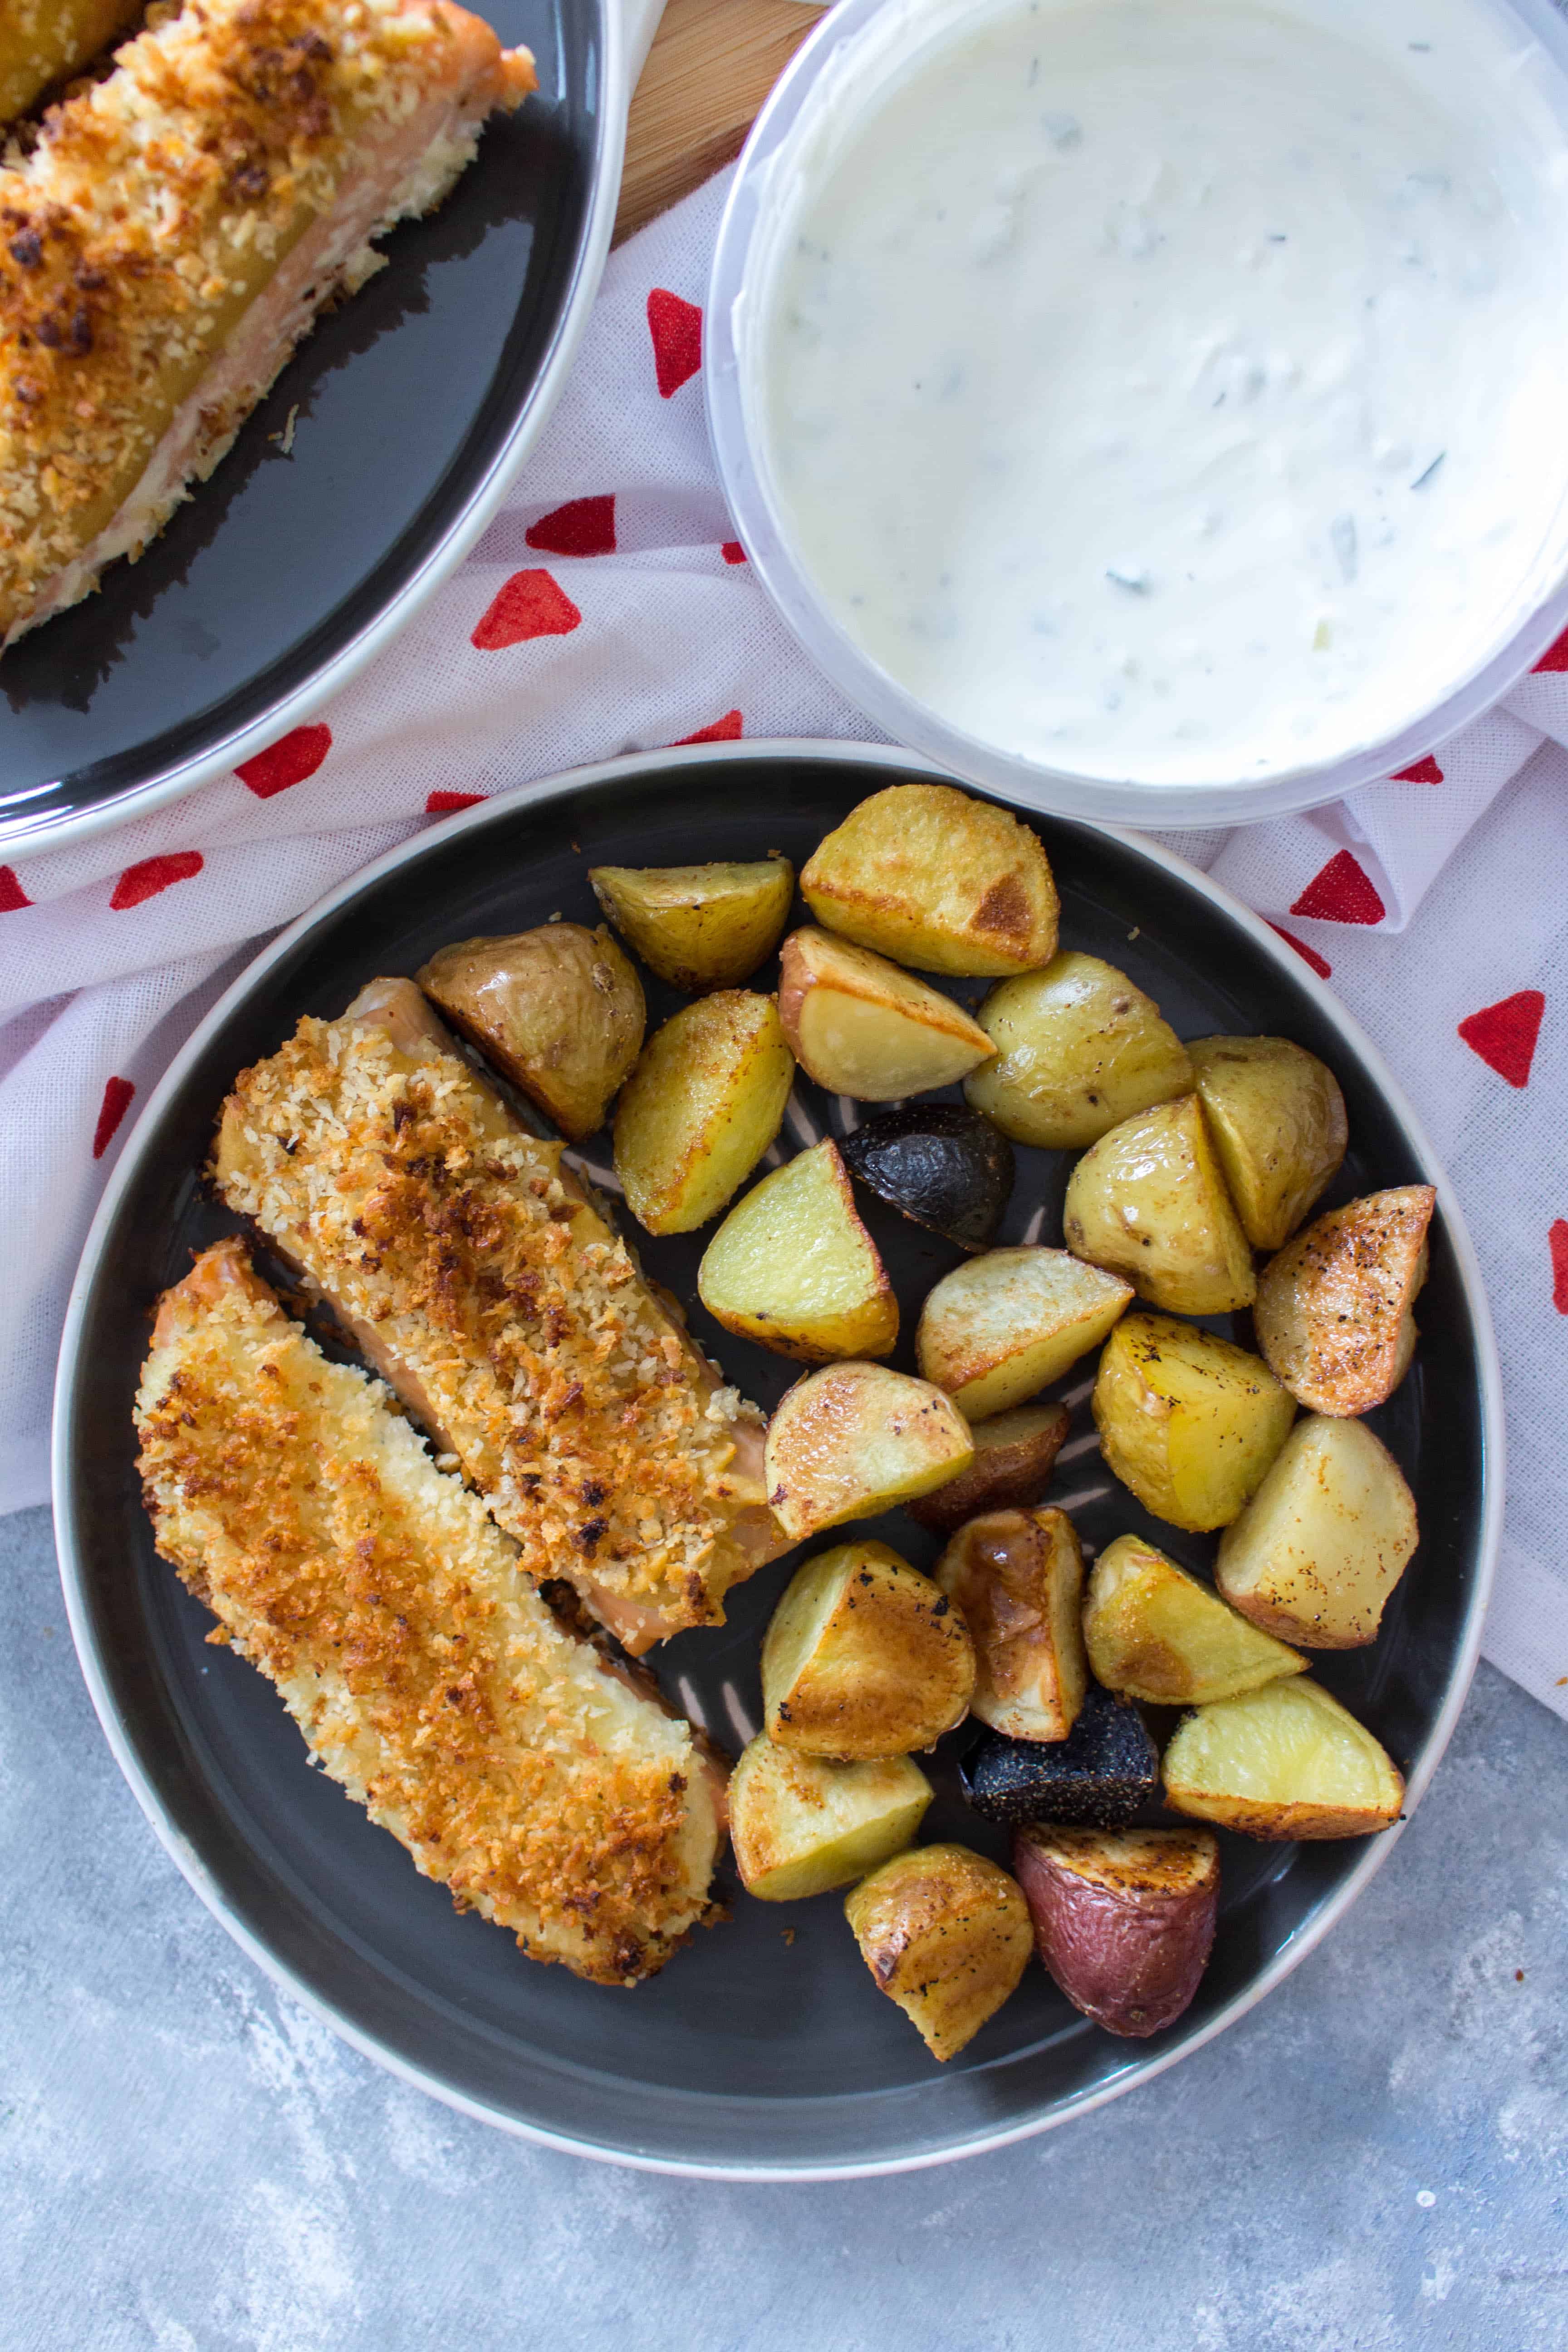 This delicious Tzatziki Crusted Salmon with Panko is baked to perfection! This Tzatziki Crusted Salmon is perfect for a healthy weeknight dinner and lunch meal prep with the leftovers.